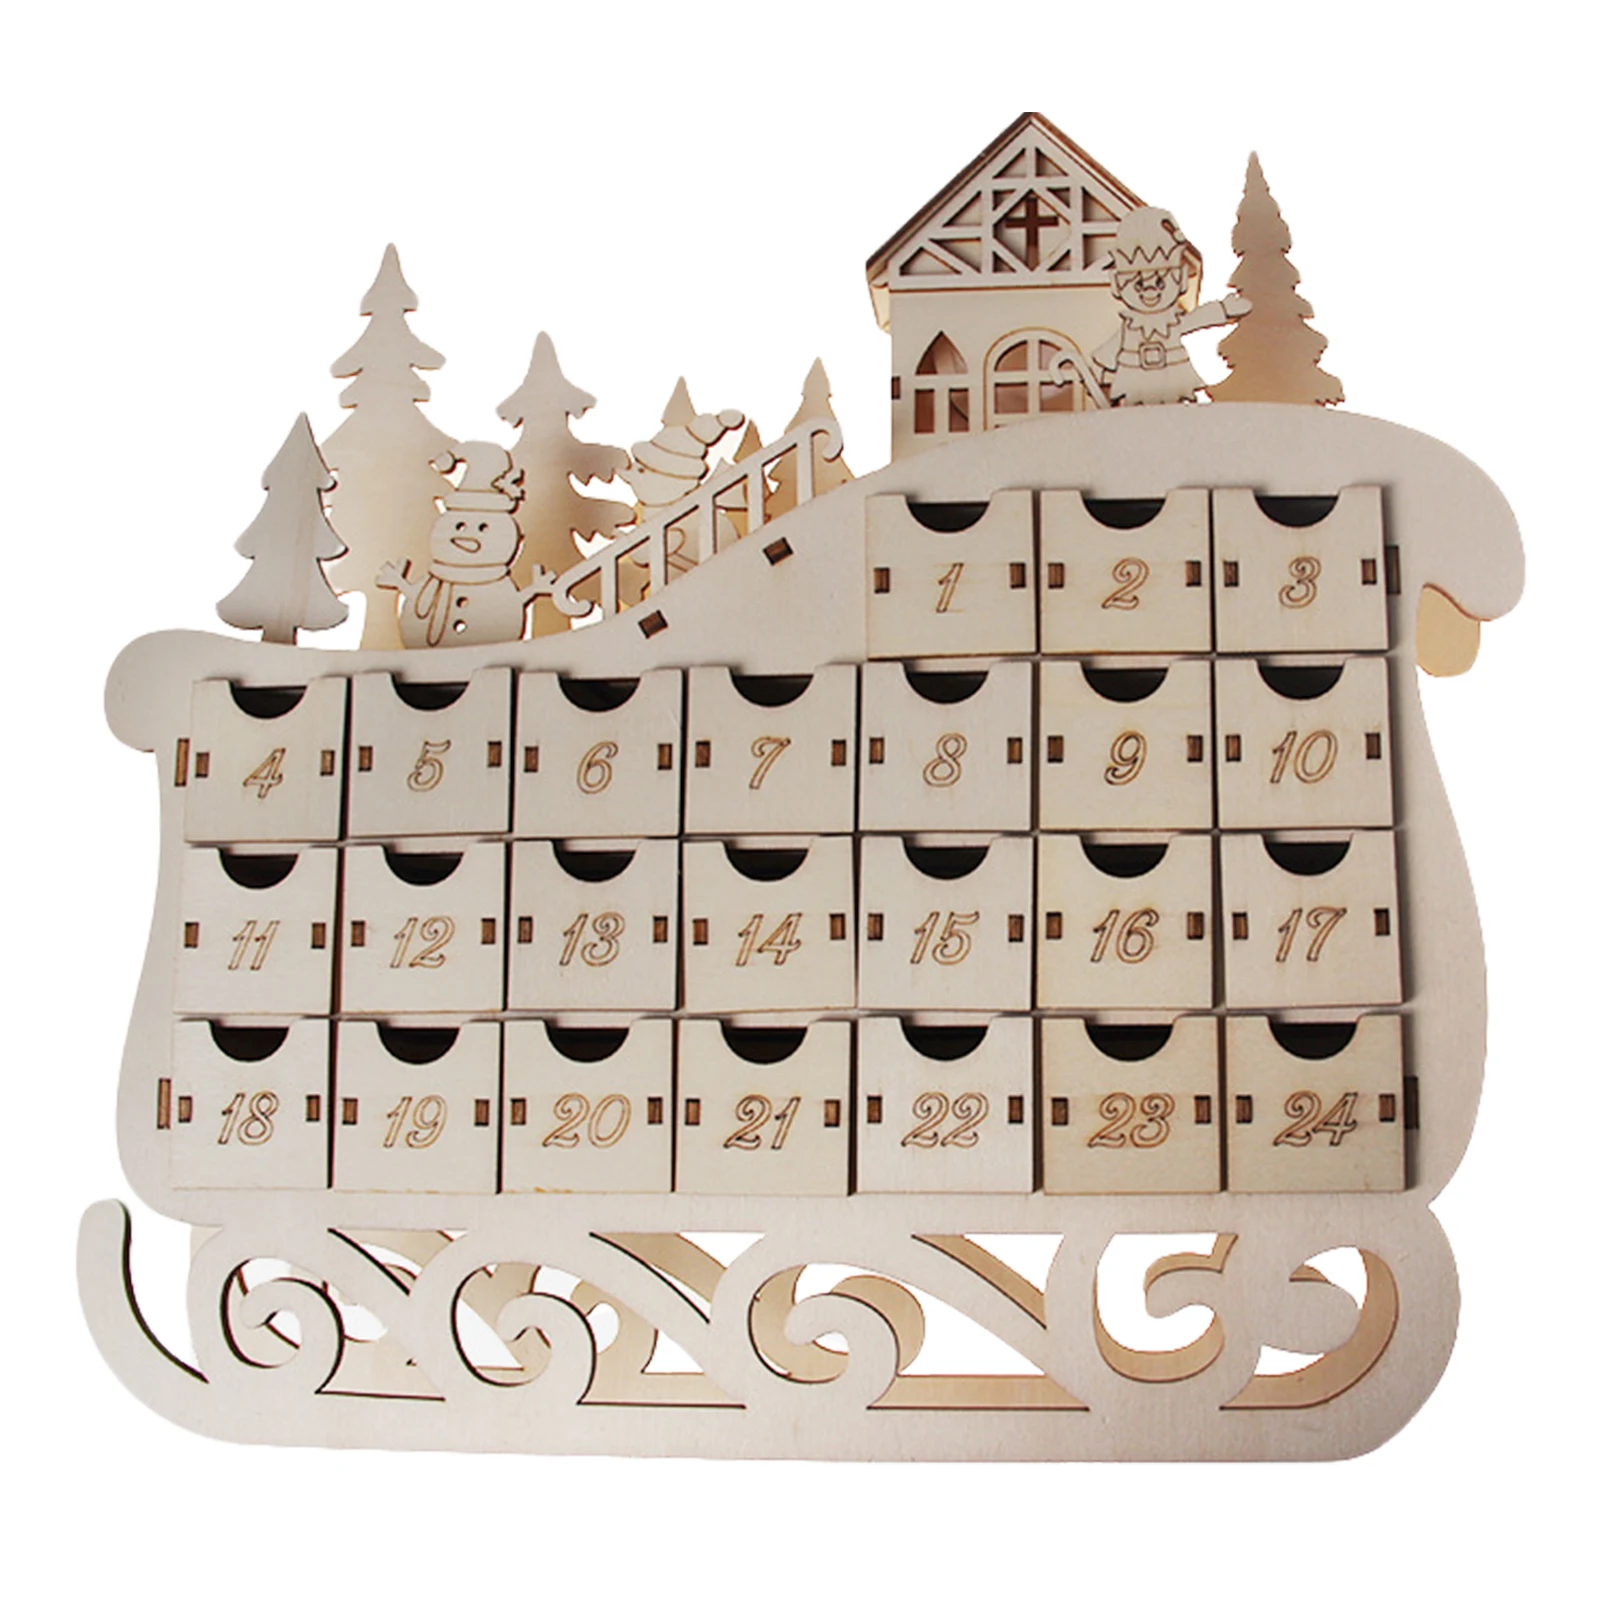 

24 Day Advent Calendar Wooden Durable House Advent Calendar Countdown To Christmas For Storing Gifts Candies For Merry Christm